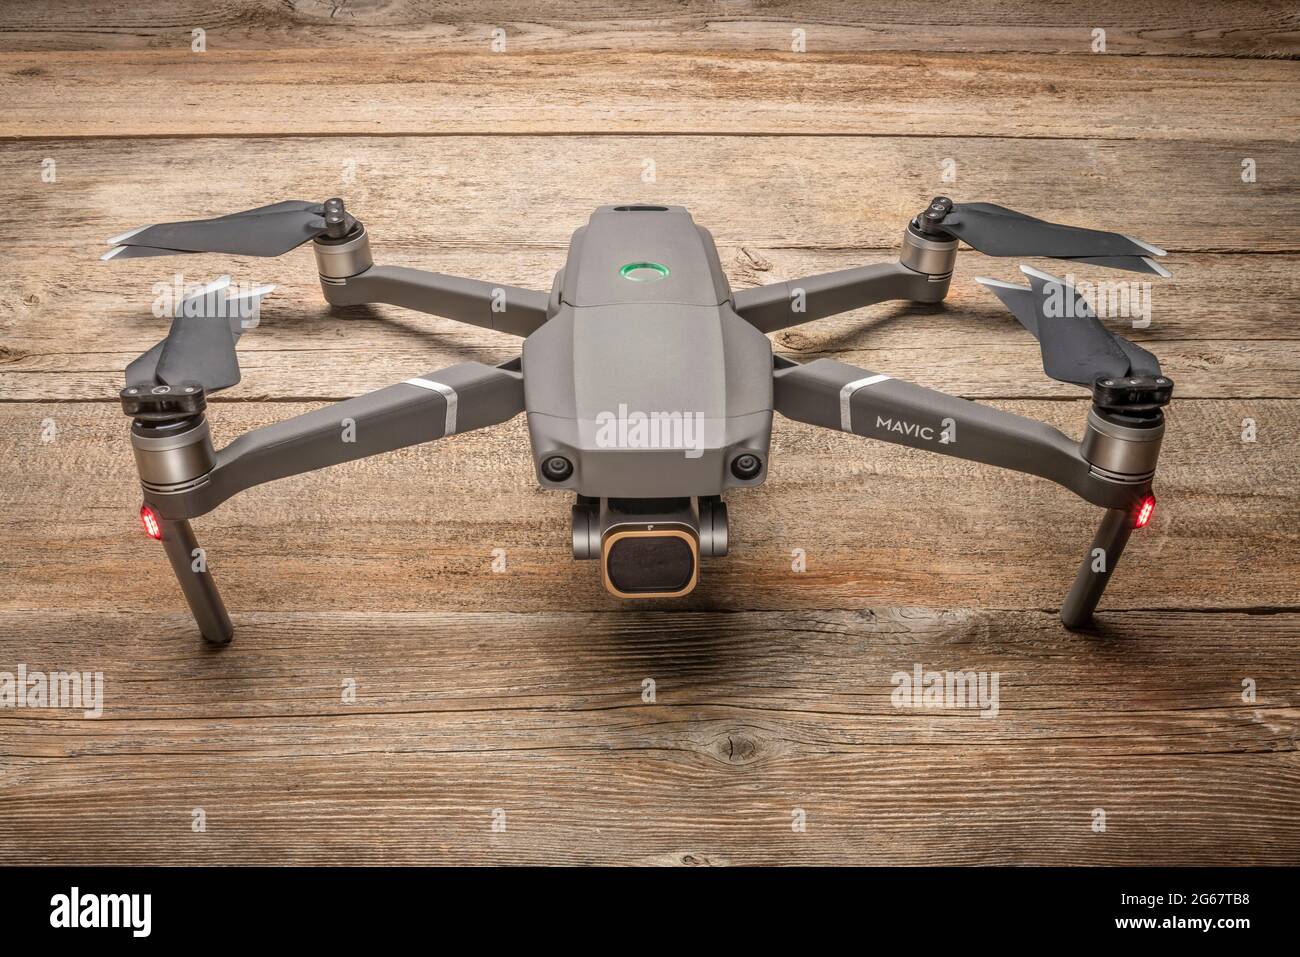 Fort Collins, CO, USA - June 30, 2021: DJI Mavic 2 pro with ND filter on a camera, an advanced prosumer folding drone ready for take off. Stock Photo